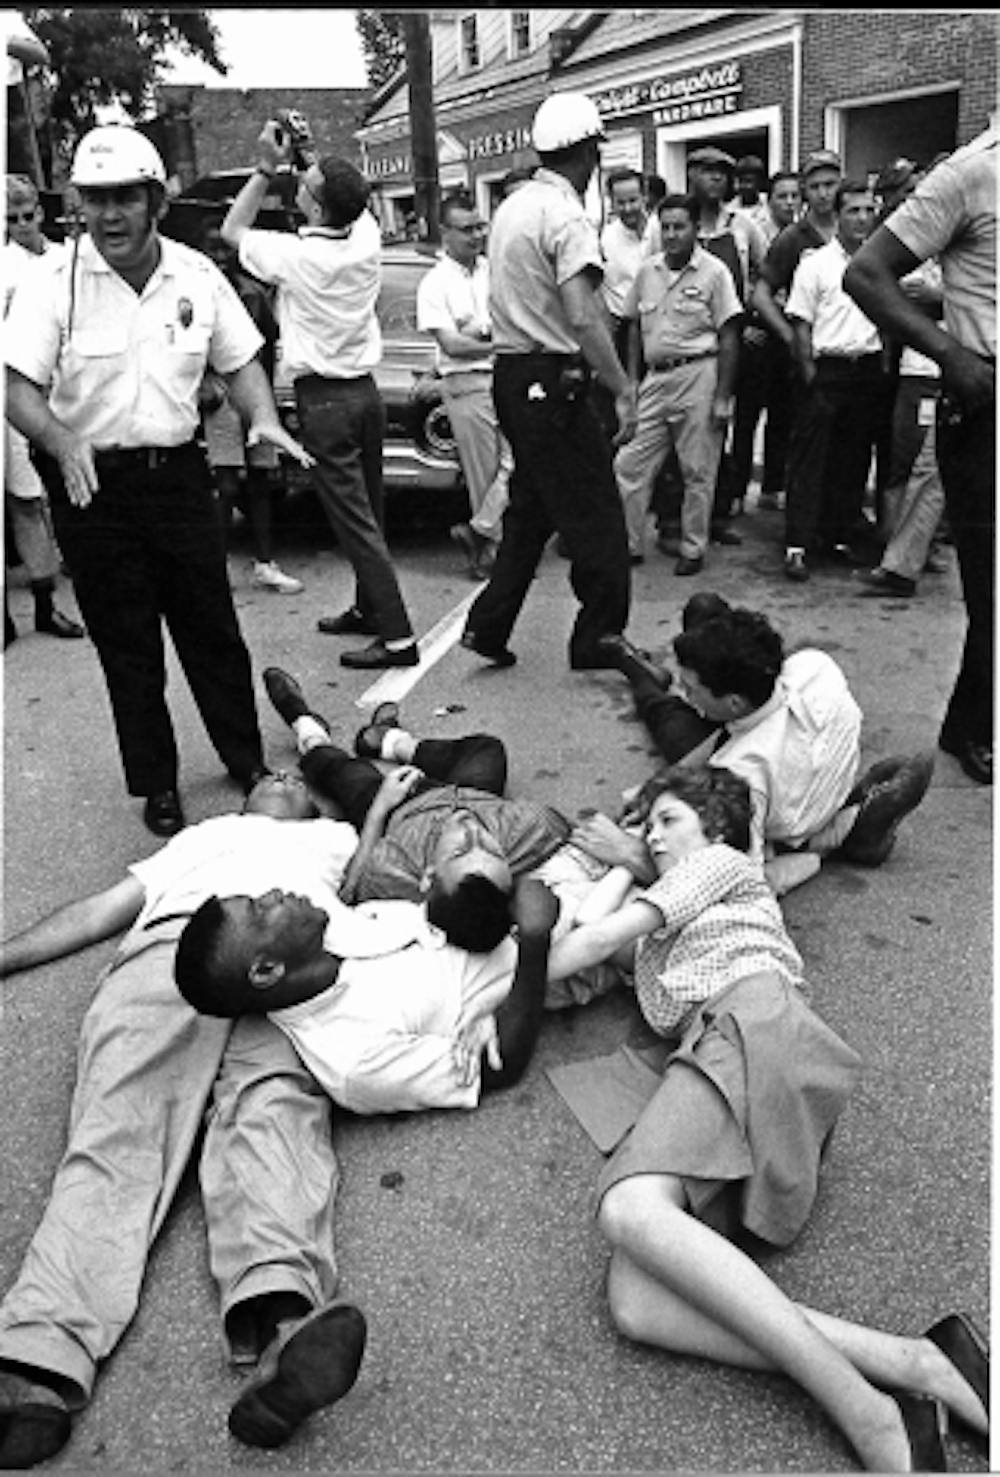 <p>Photo courtesy of Chapel Hill Public Library, from their book "Courage in the Moment. The Civil Rights Struggle 1961-1964" photographed by Jim Wallace. Protestors had to agree to practice nonviolent resistance by neither assisting or resisting arrest, here the demonstrators are lying on Franklin Street, according to the book.&nbsp;</p>